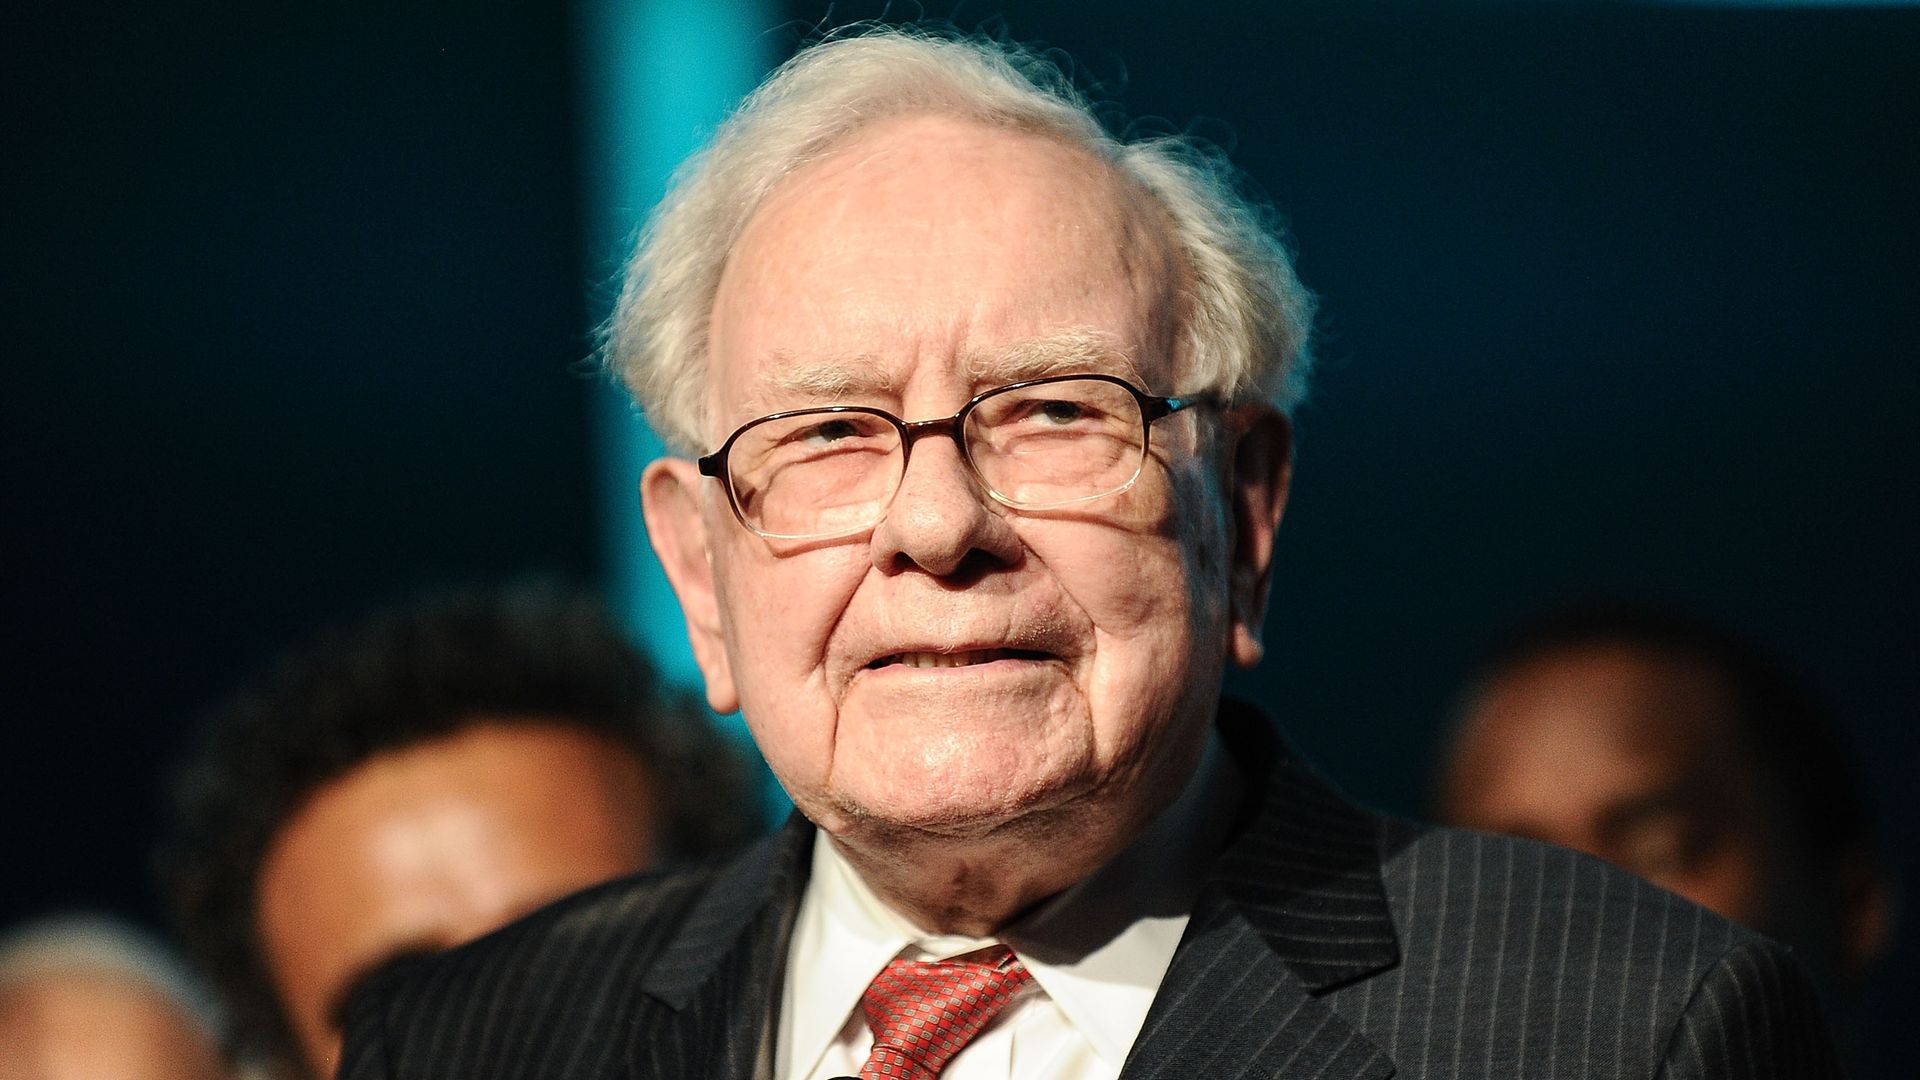 In this image, Warren Buffet stands in a suit and tie and looks at the camera.